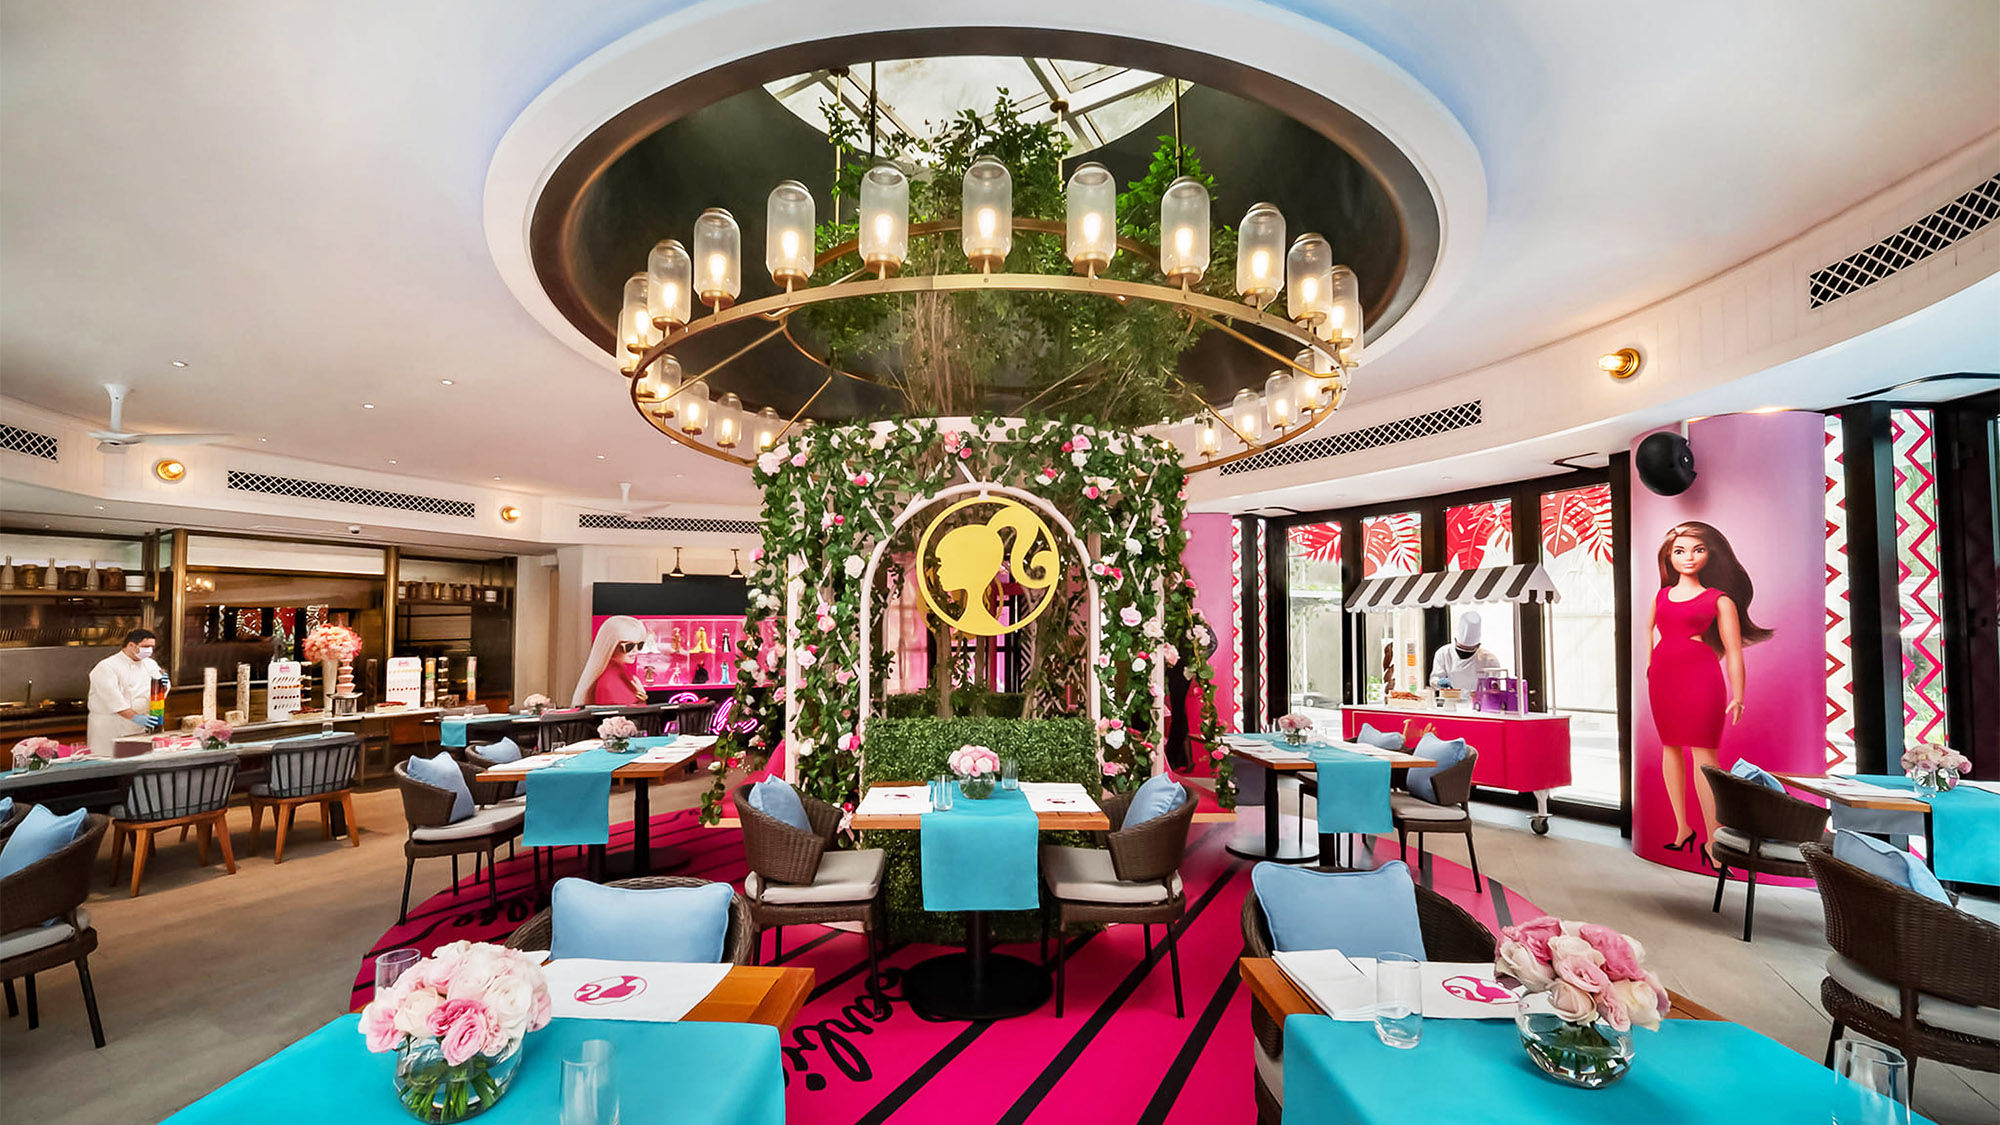 The Grand Hyatt Kuala Lumpur offers a Barbie-themed dining experience at the Barbie Cafe.